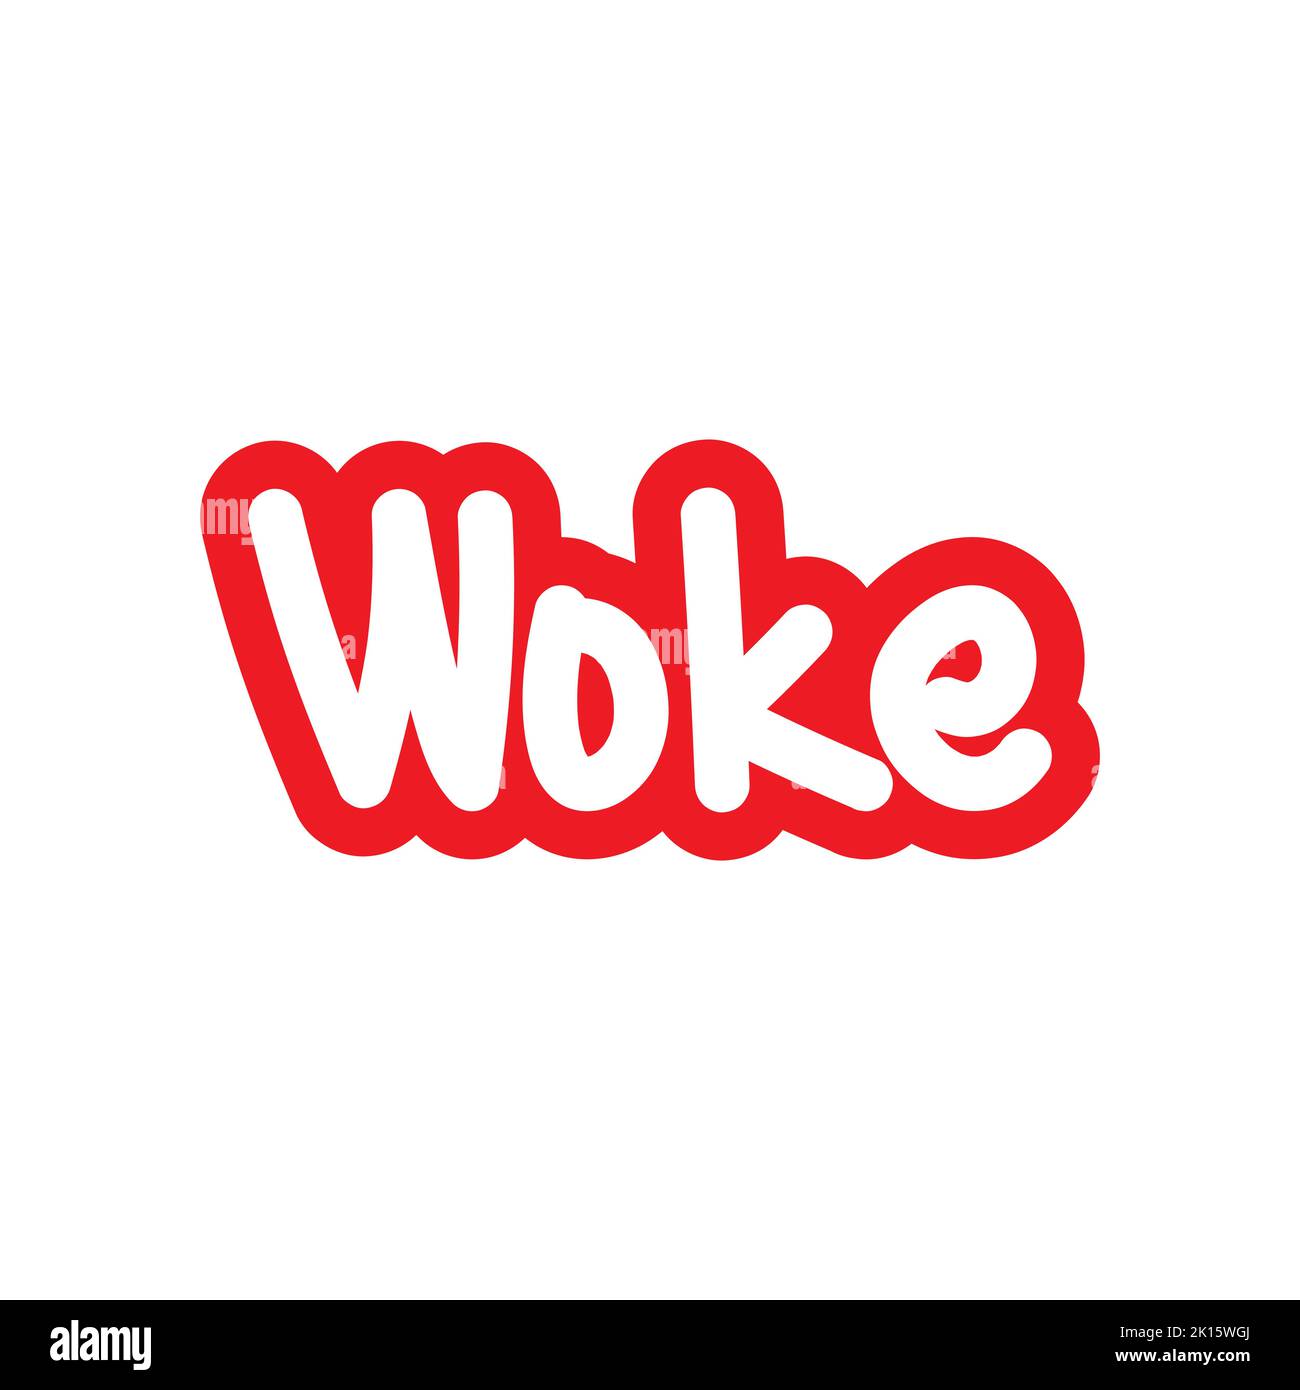 Woke Gen Z Slang Word Sticker. Woke is Spiritual and intellectual enlightenment, like waking up from a deep sleep and seeing things clearly for the fi Stock Vector